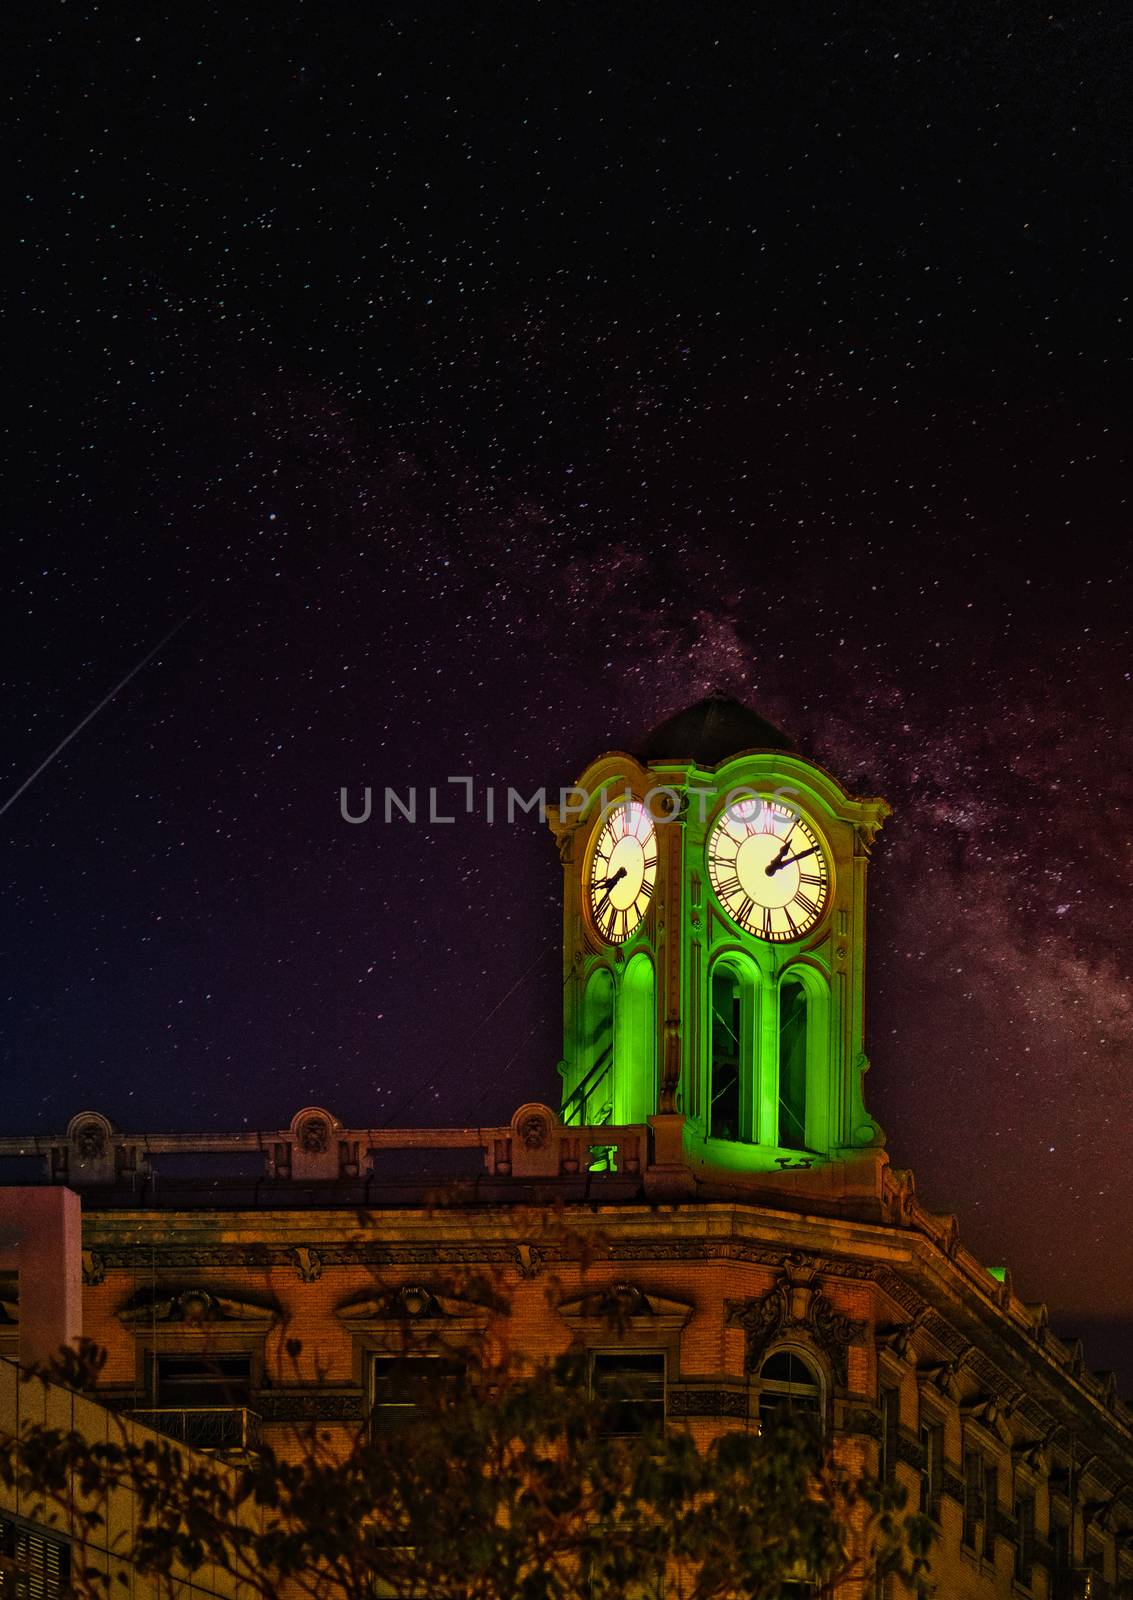 Lighted Clock Tower on Starry Night by dbvirago